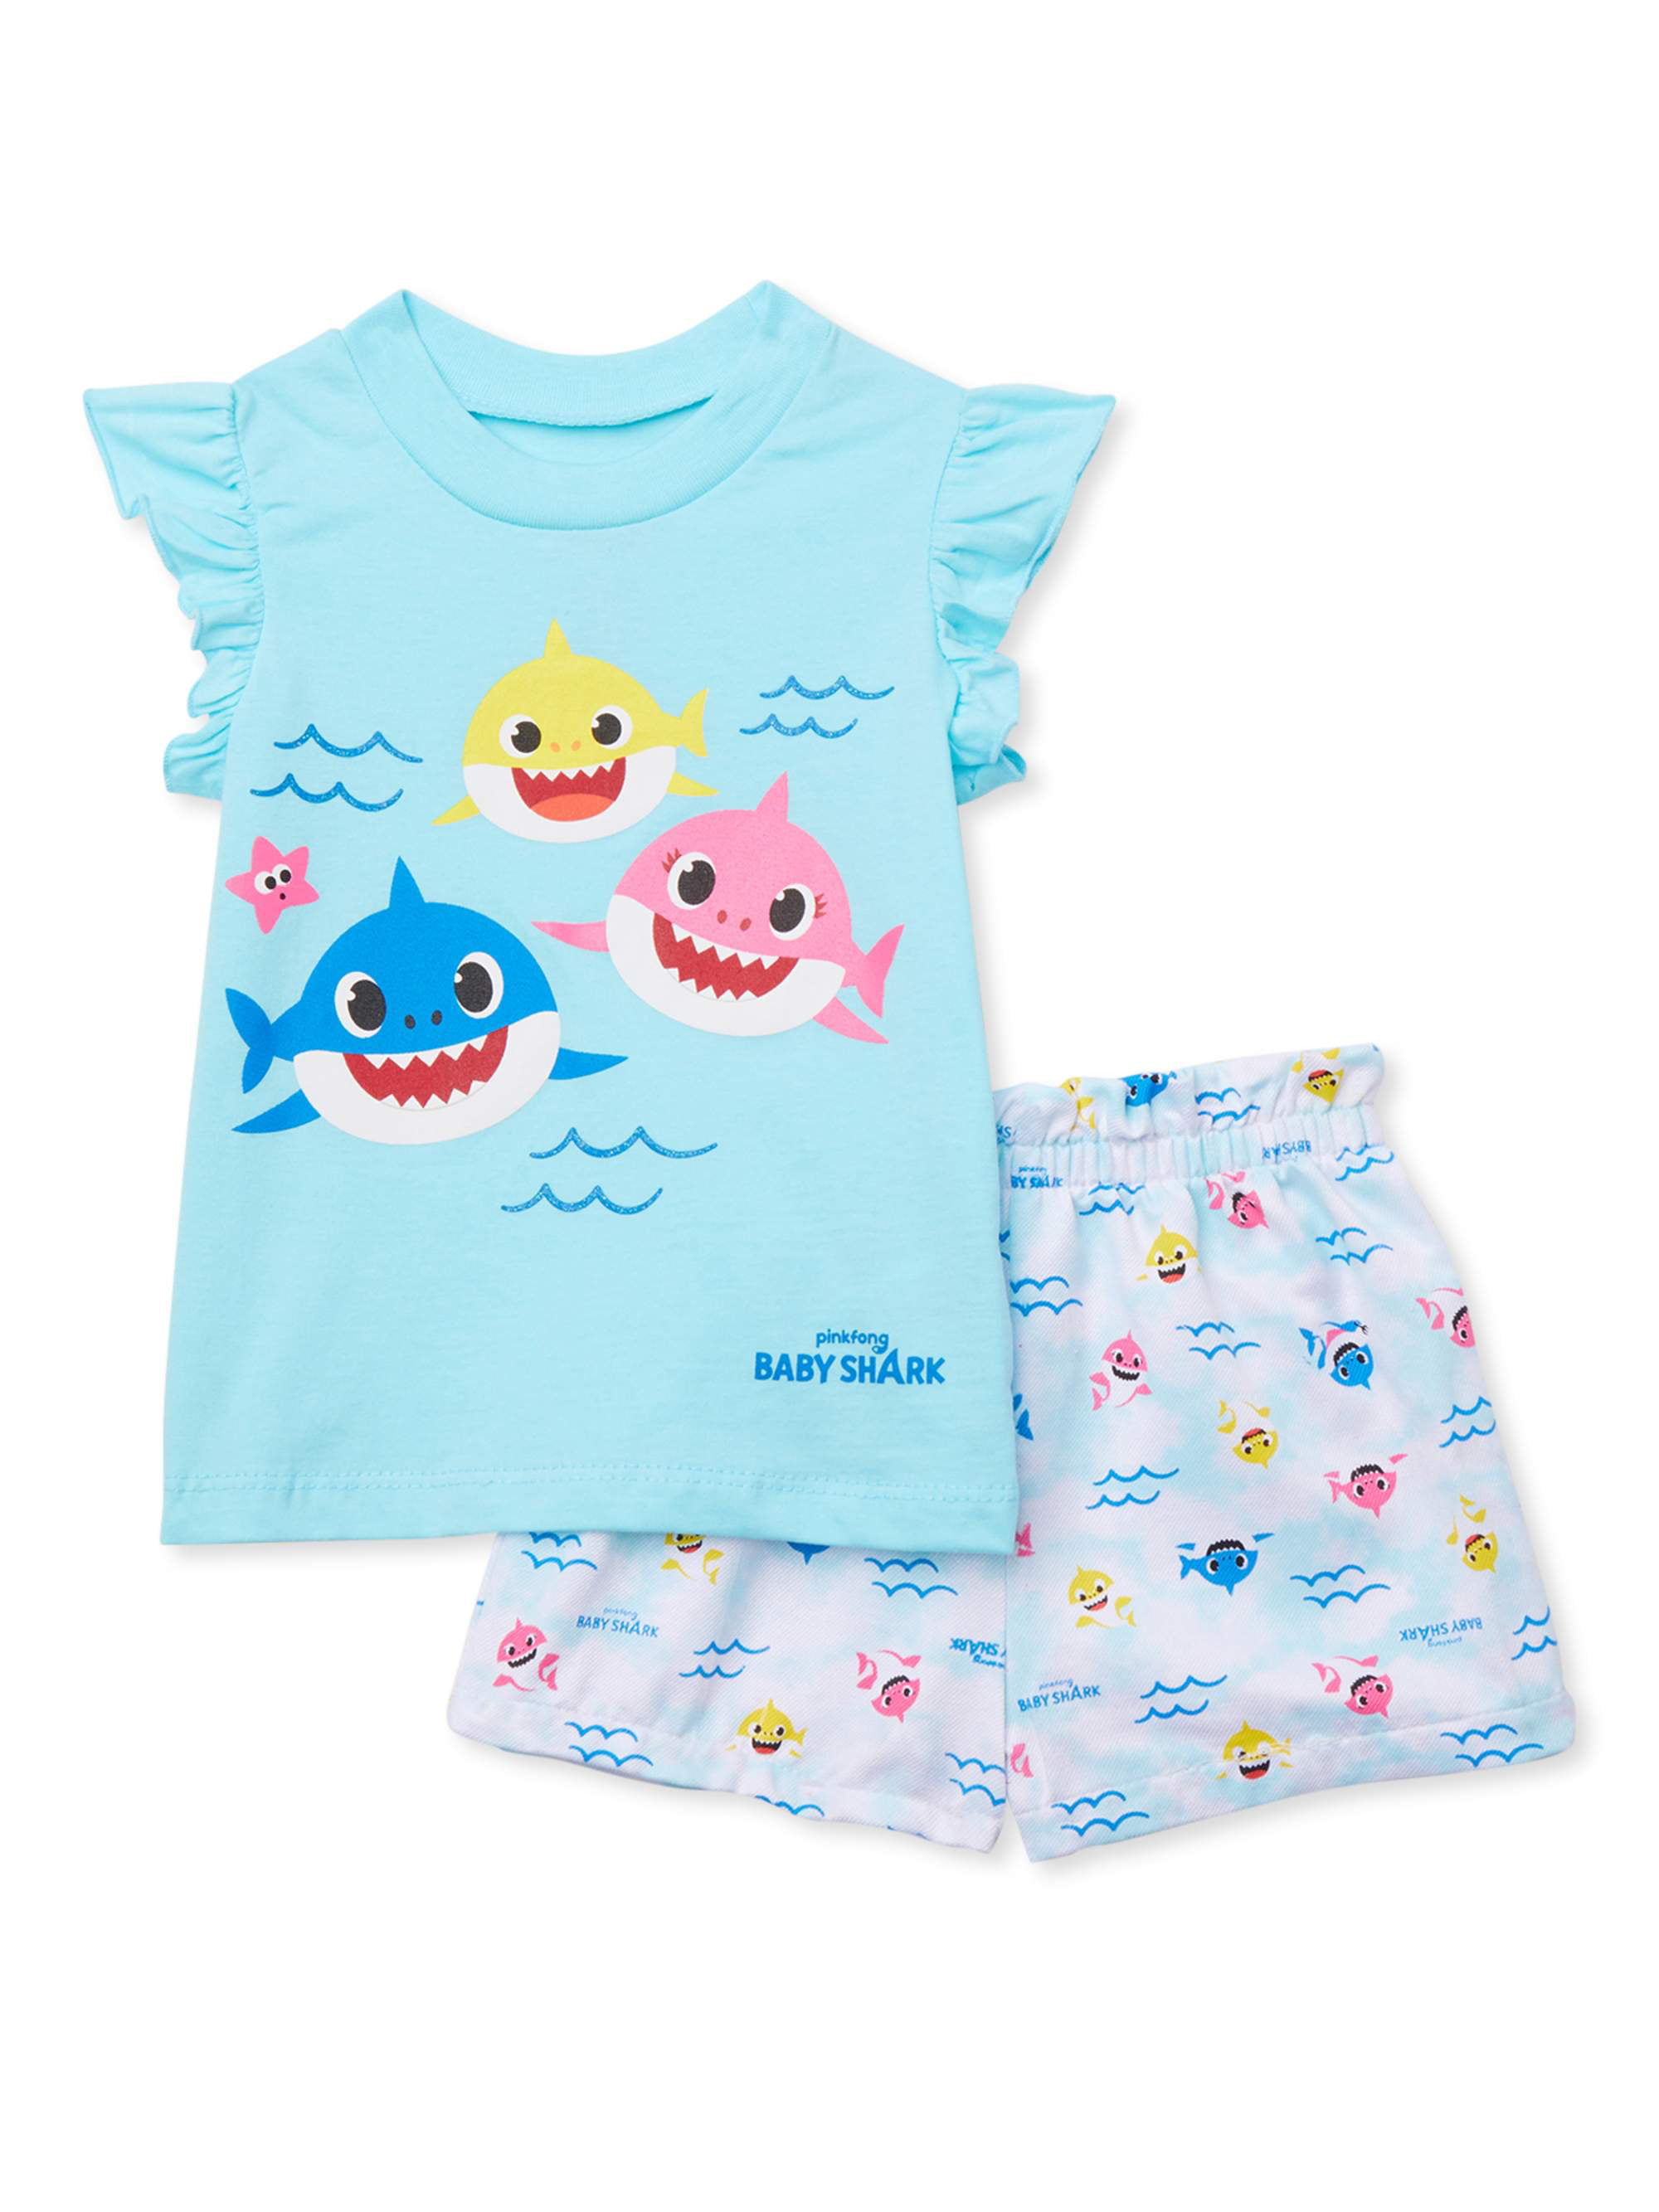 baby shark outfit